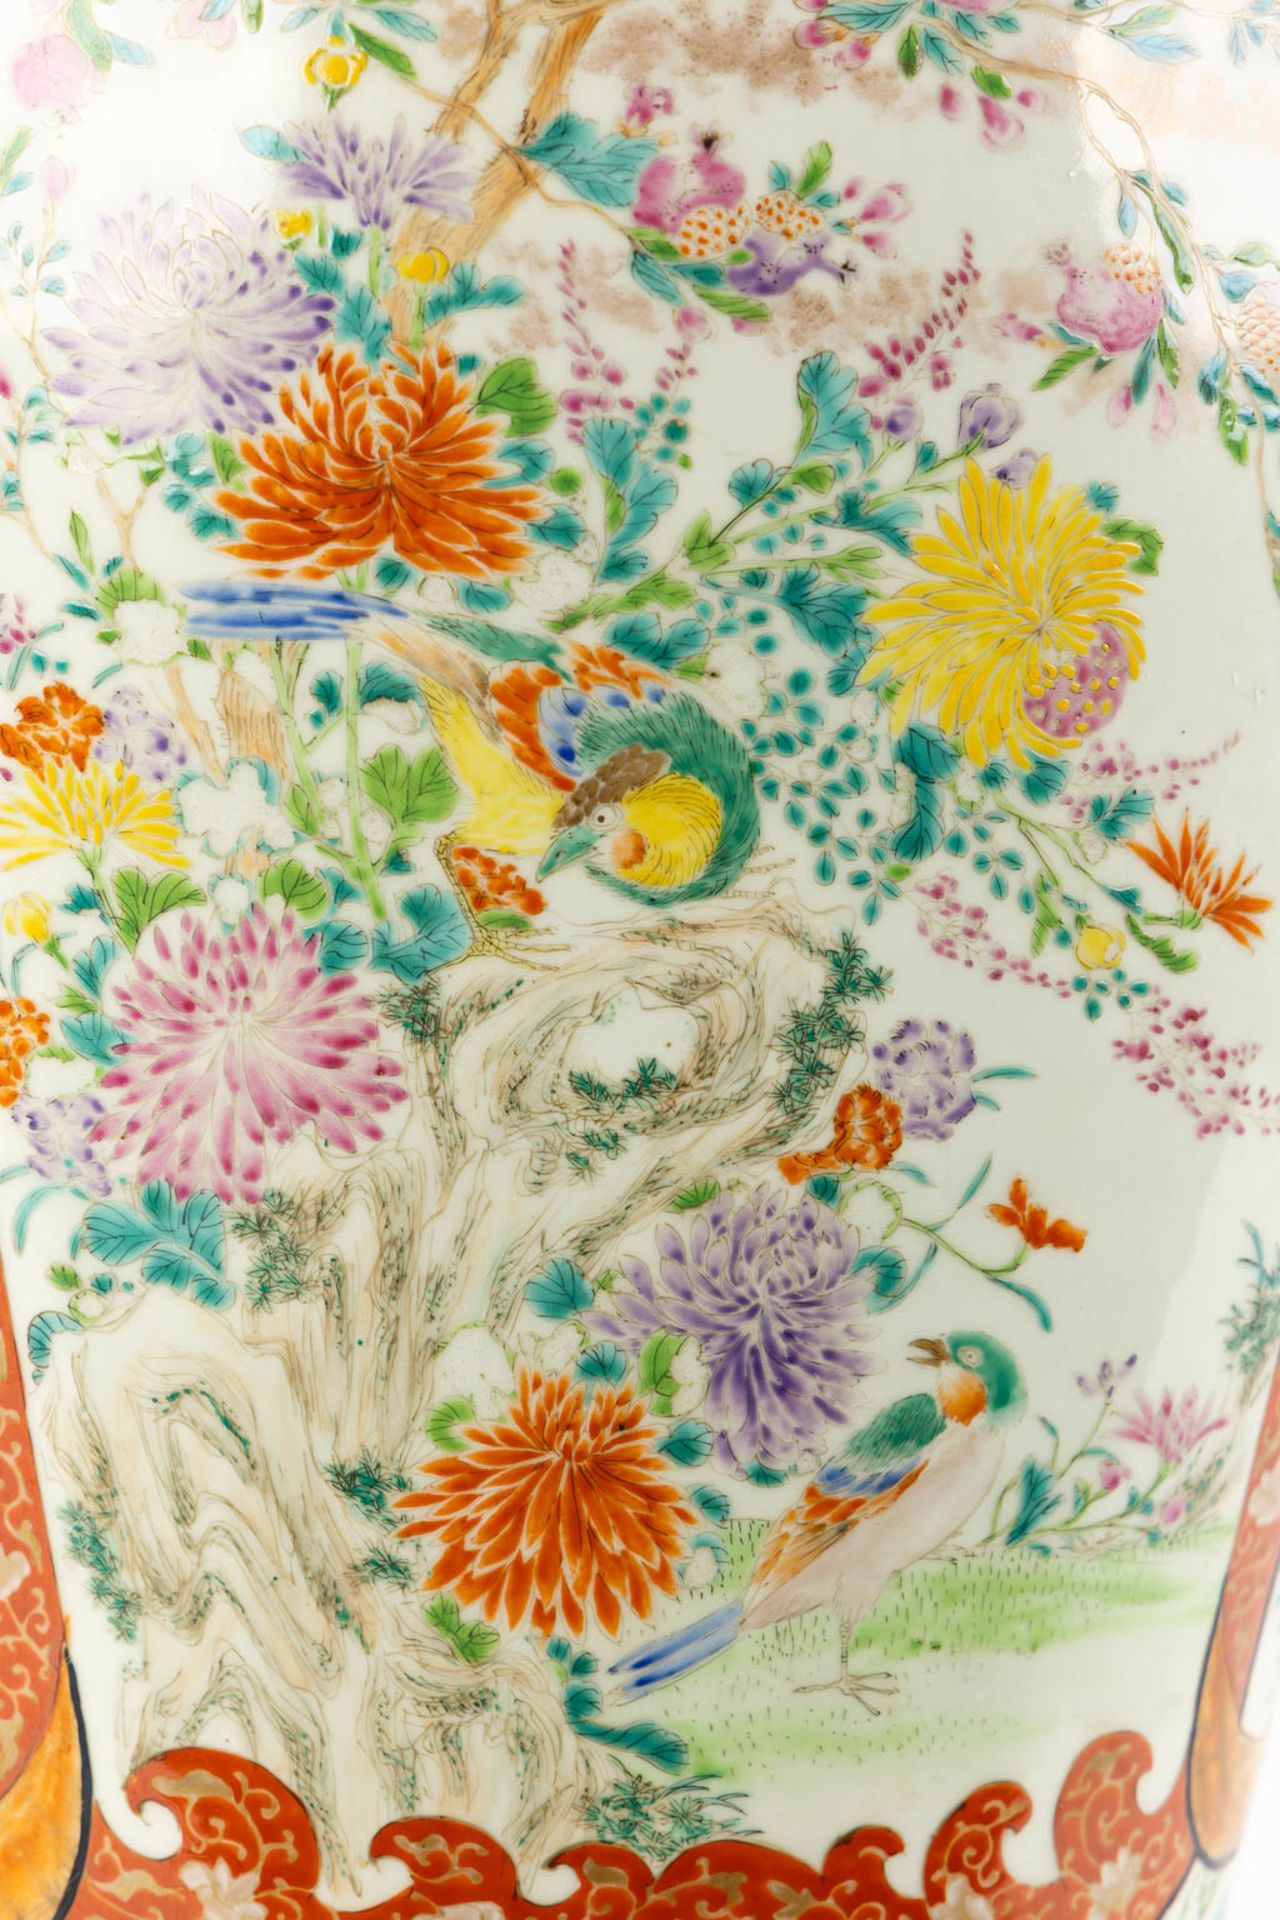 A large Japanese Kutani vase, decorated with fauna and flora. 19th C. (H:61 x D:38 cm) - Image 13 of 13